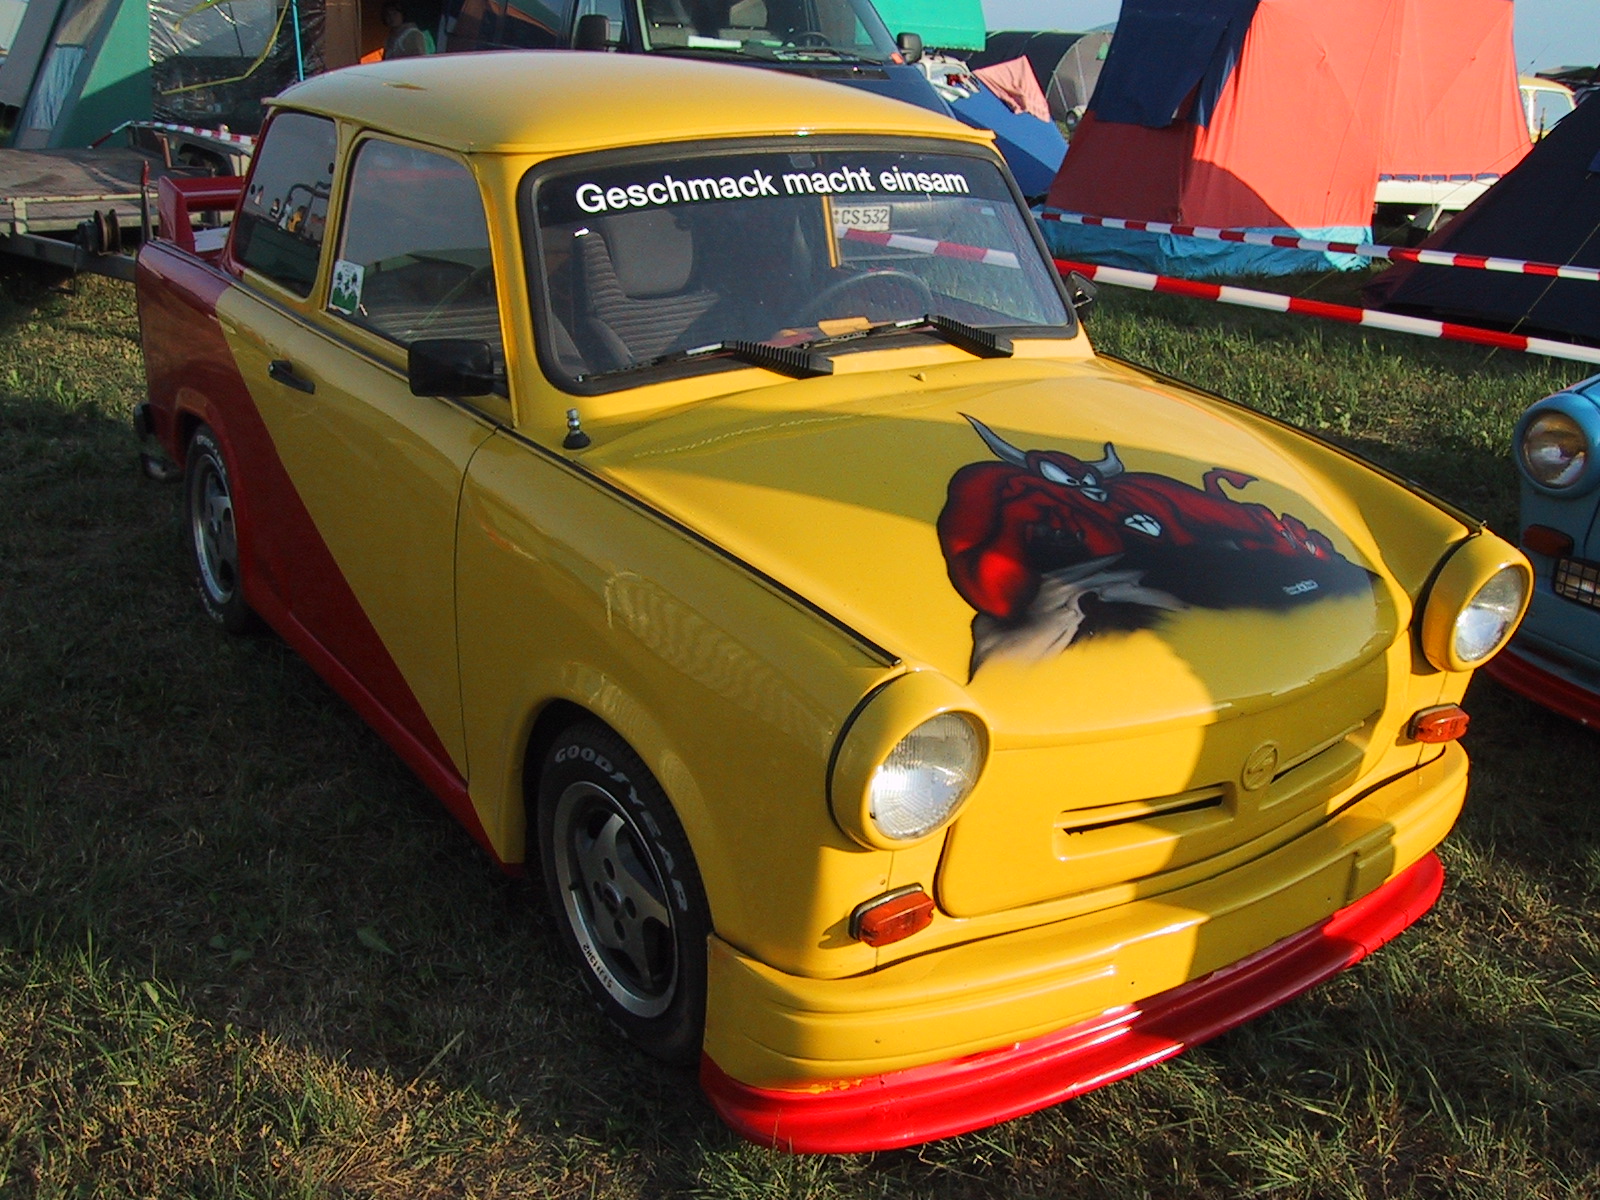 http://carinpicture.com/wp-content/uploads/2012/09/Trabant-601-Tuning-Photo-04.jpg